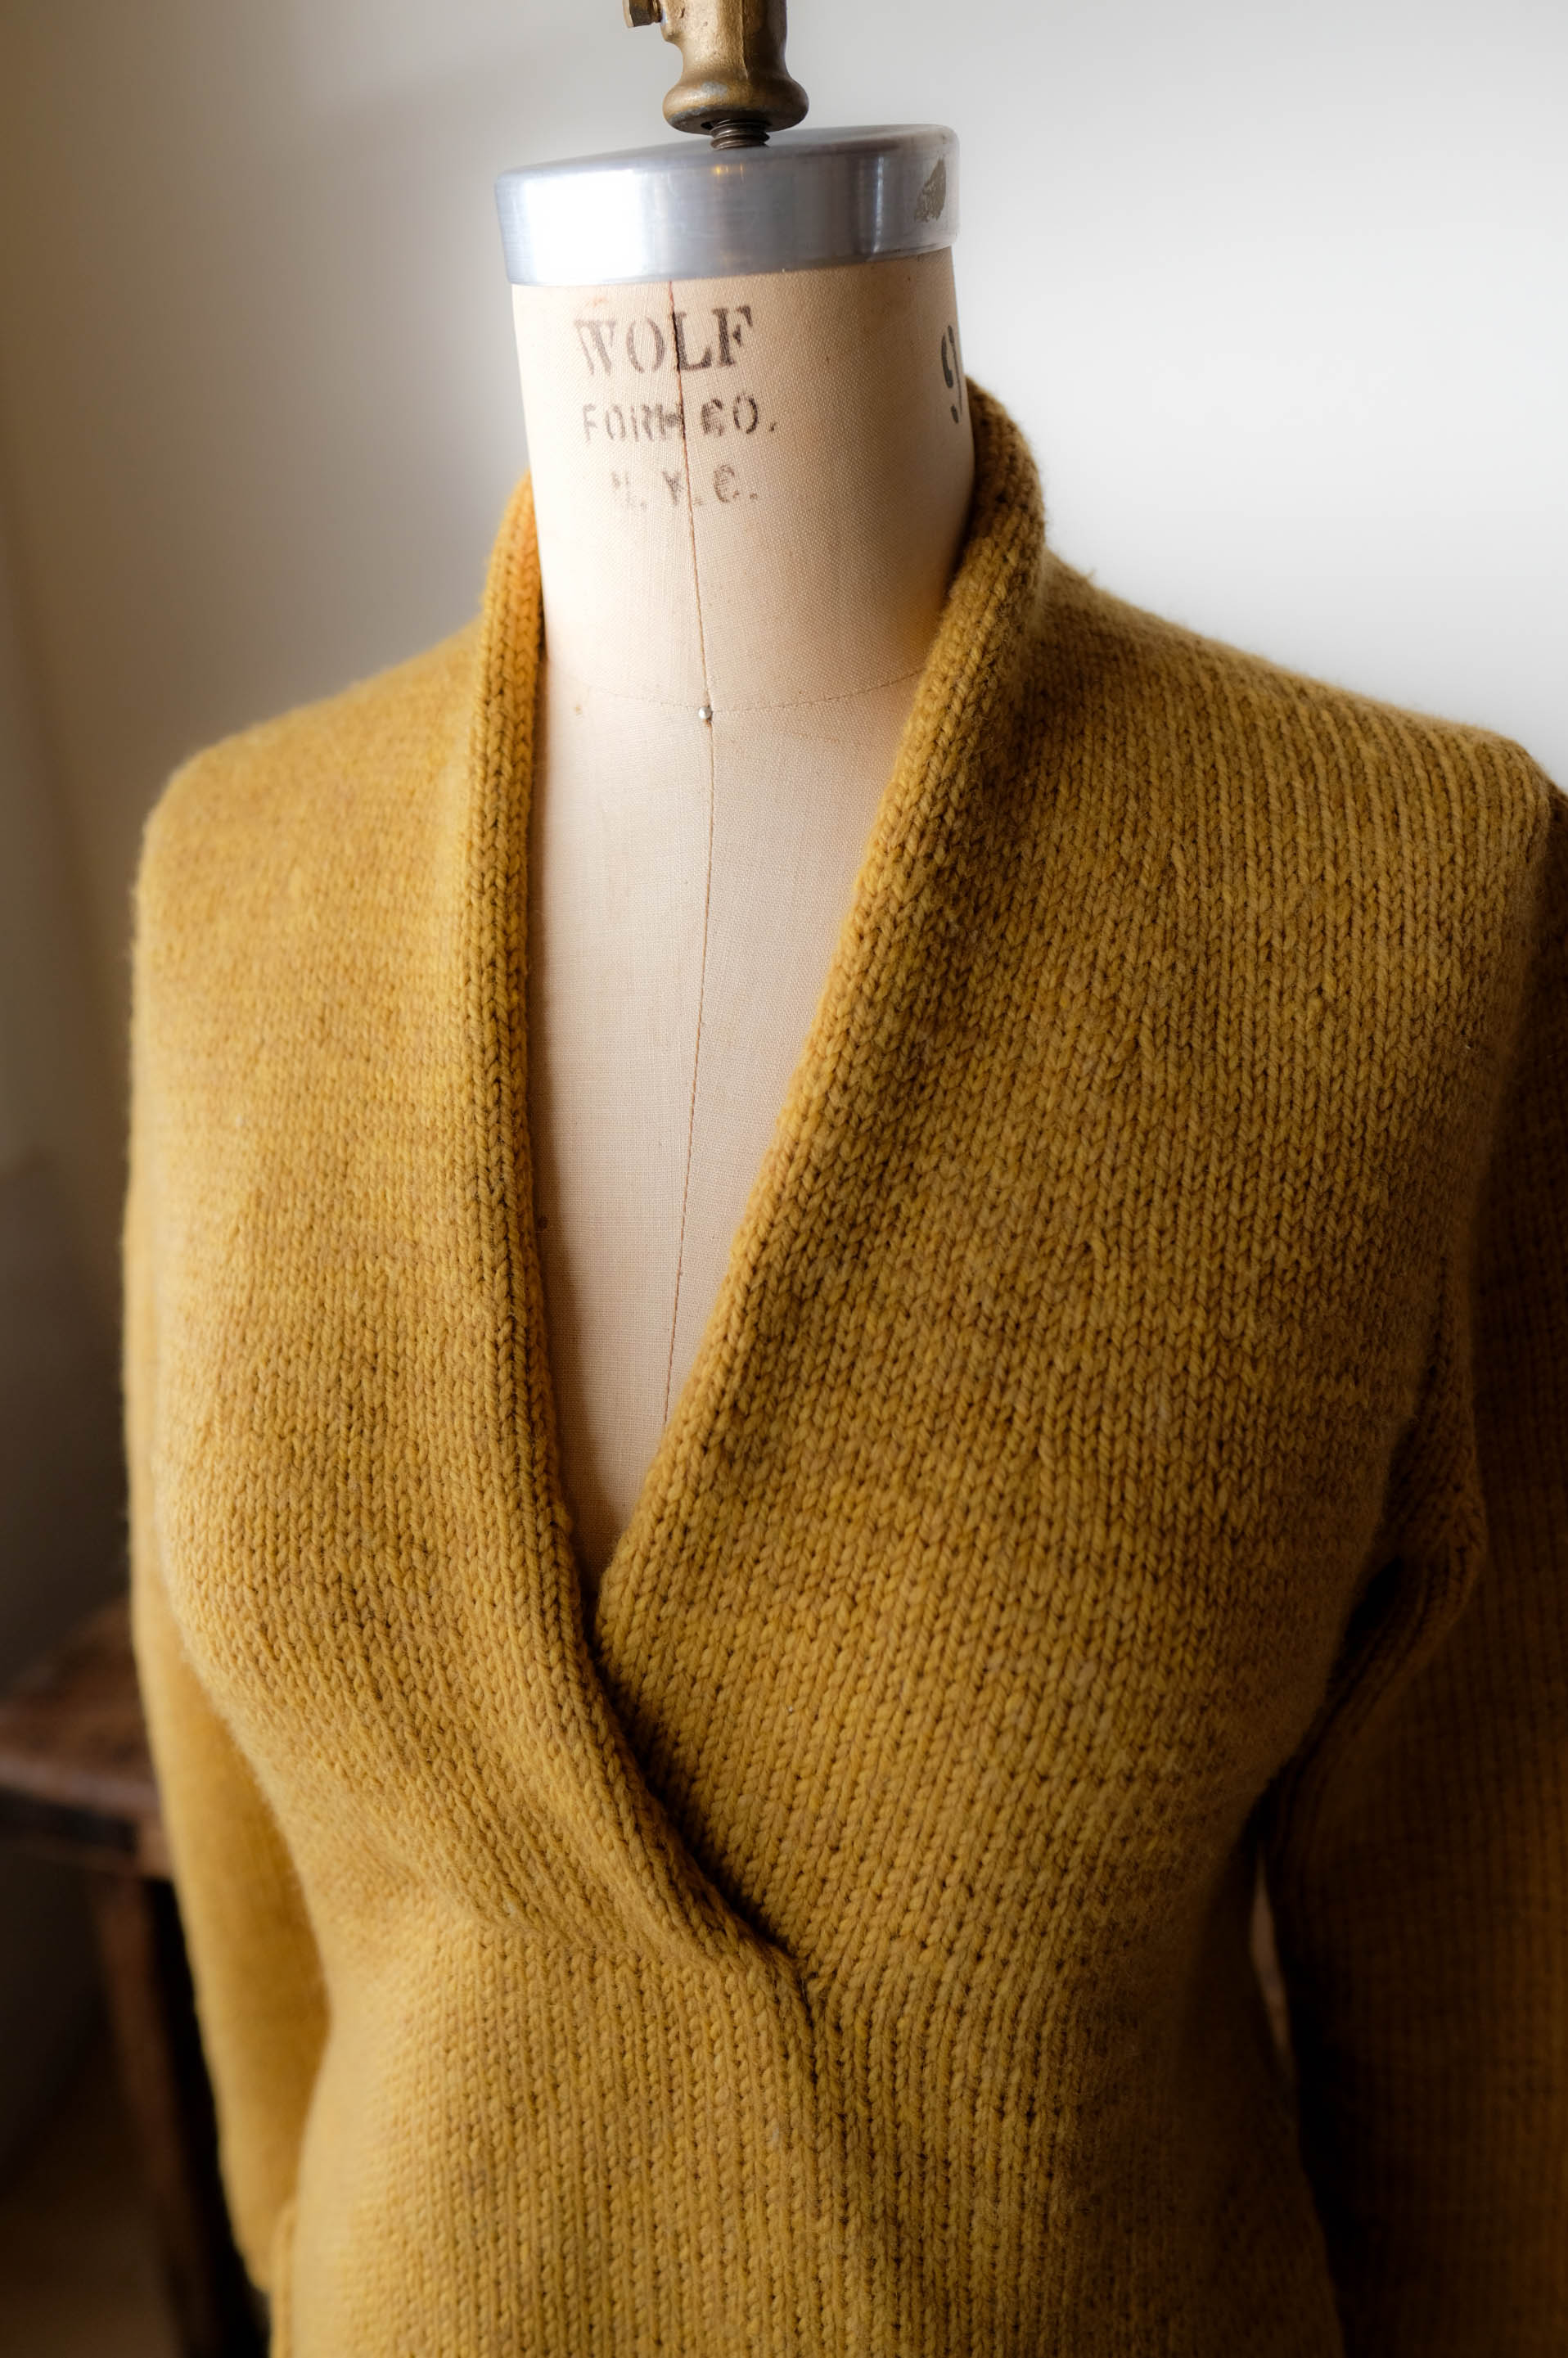 AVFKW x Cocoknits: Ruth Knit-a-Long // Gauge swatches are a good thing.